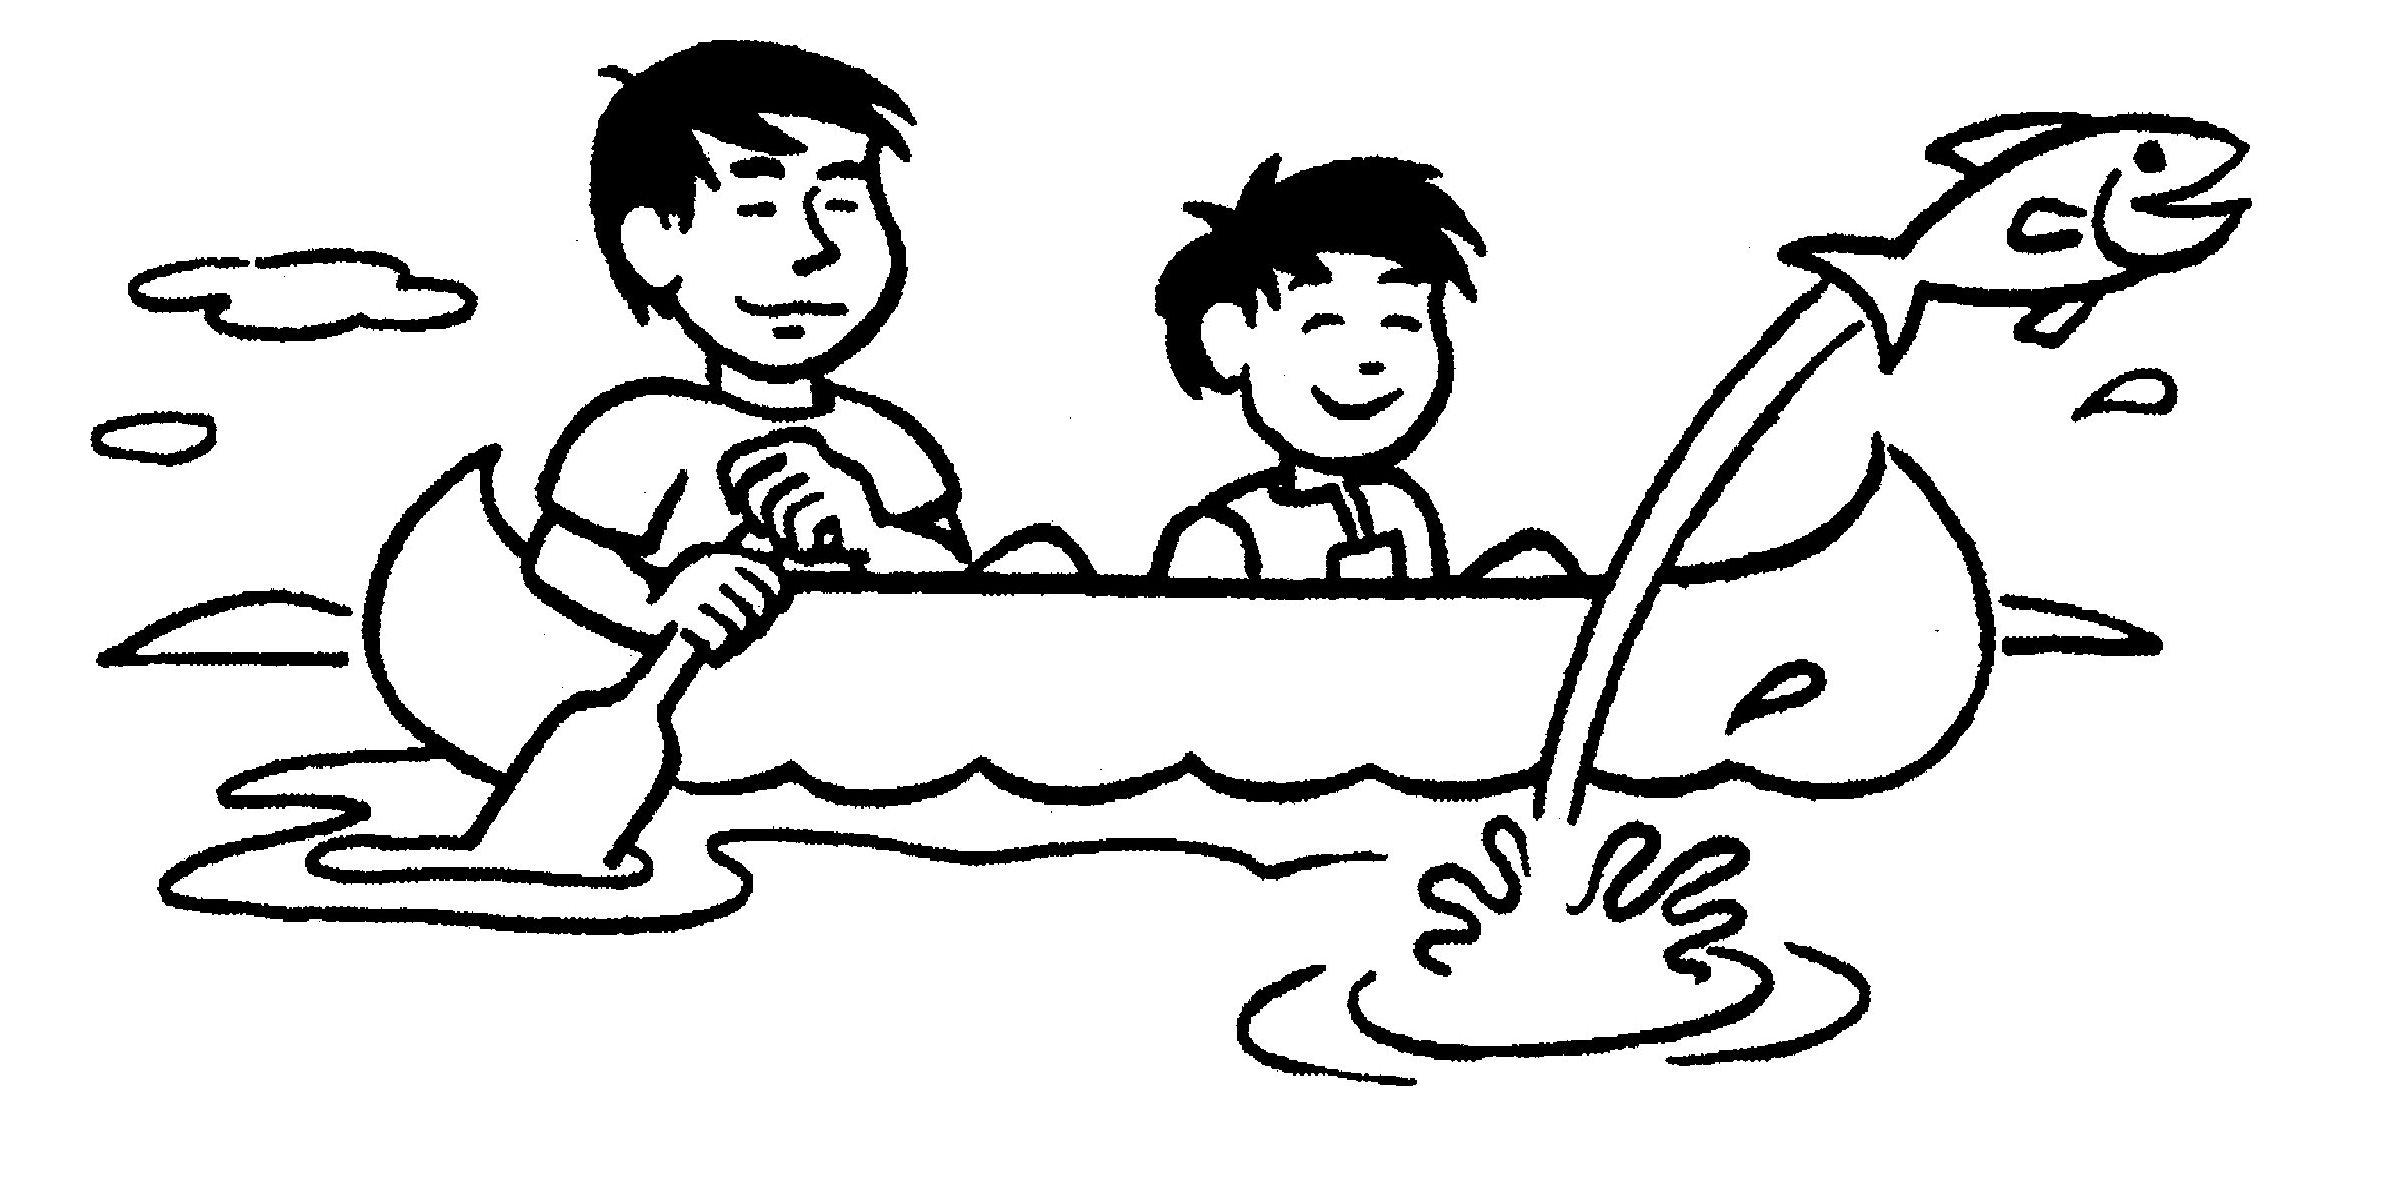 Father And Son Rowing Boat Coloring Page